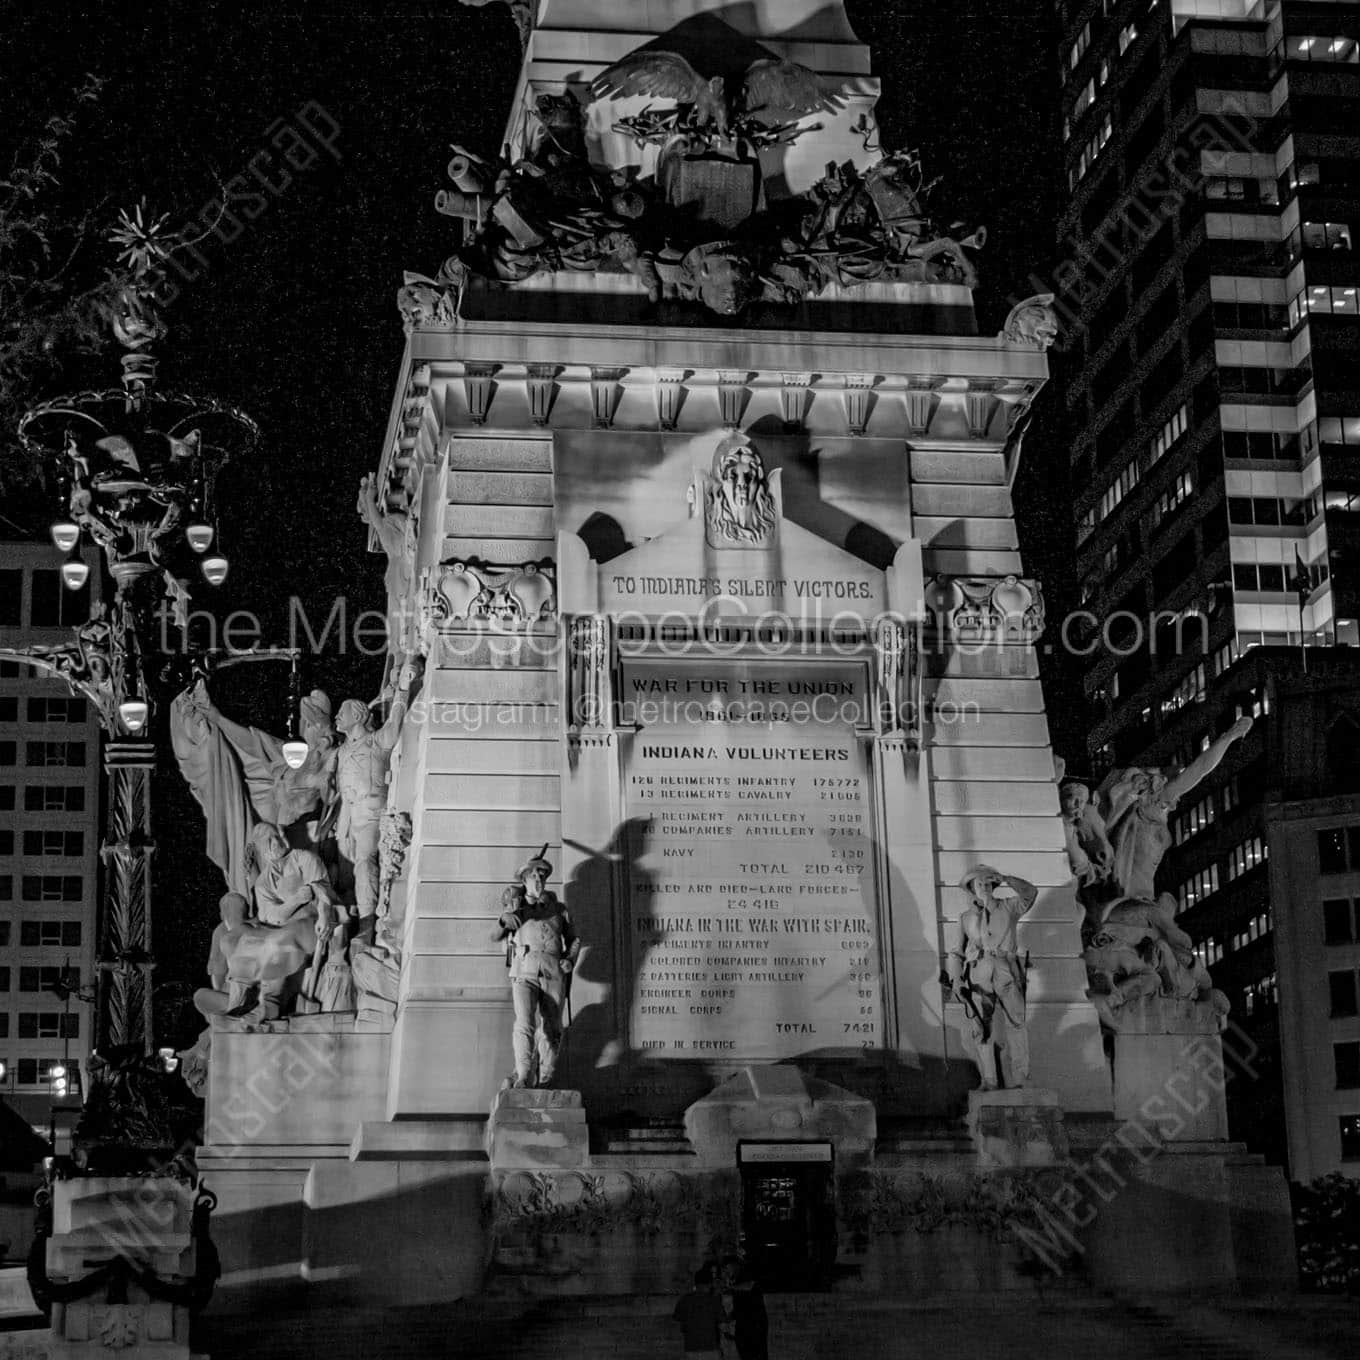 soldiers sailors monument at night Black & White Office Art